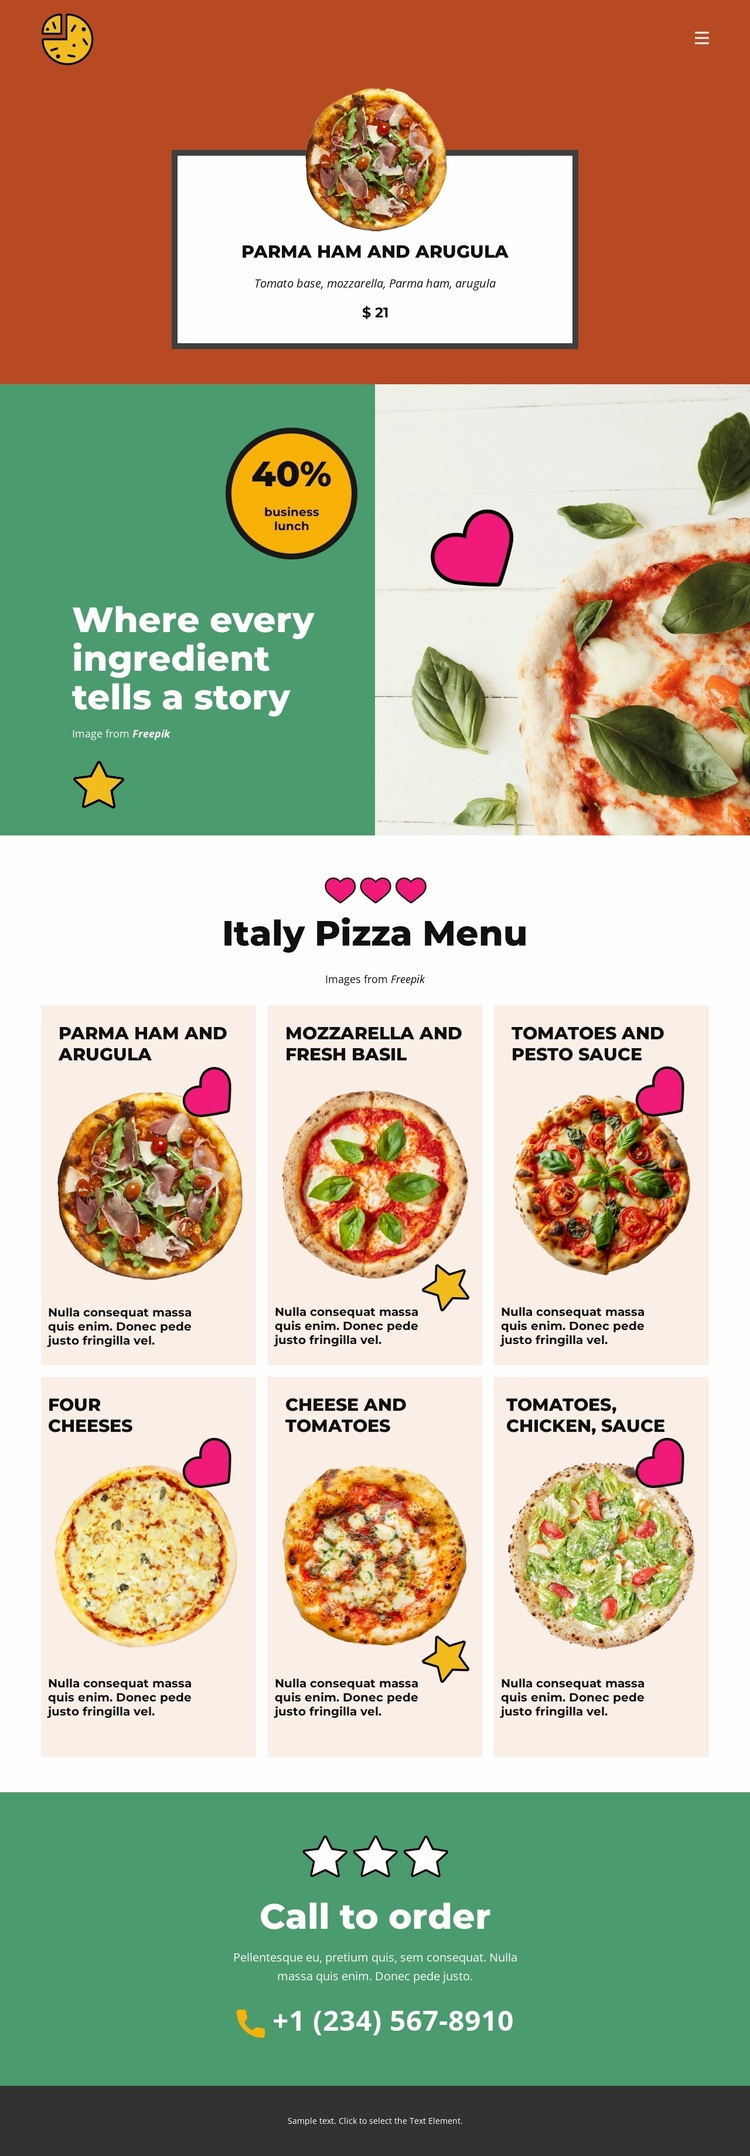 Fun Facts about Pizza Website Design